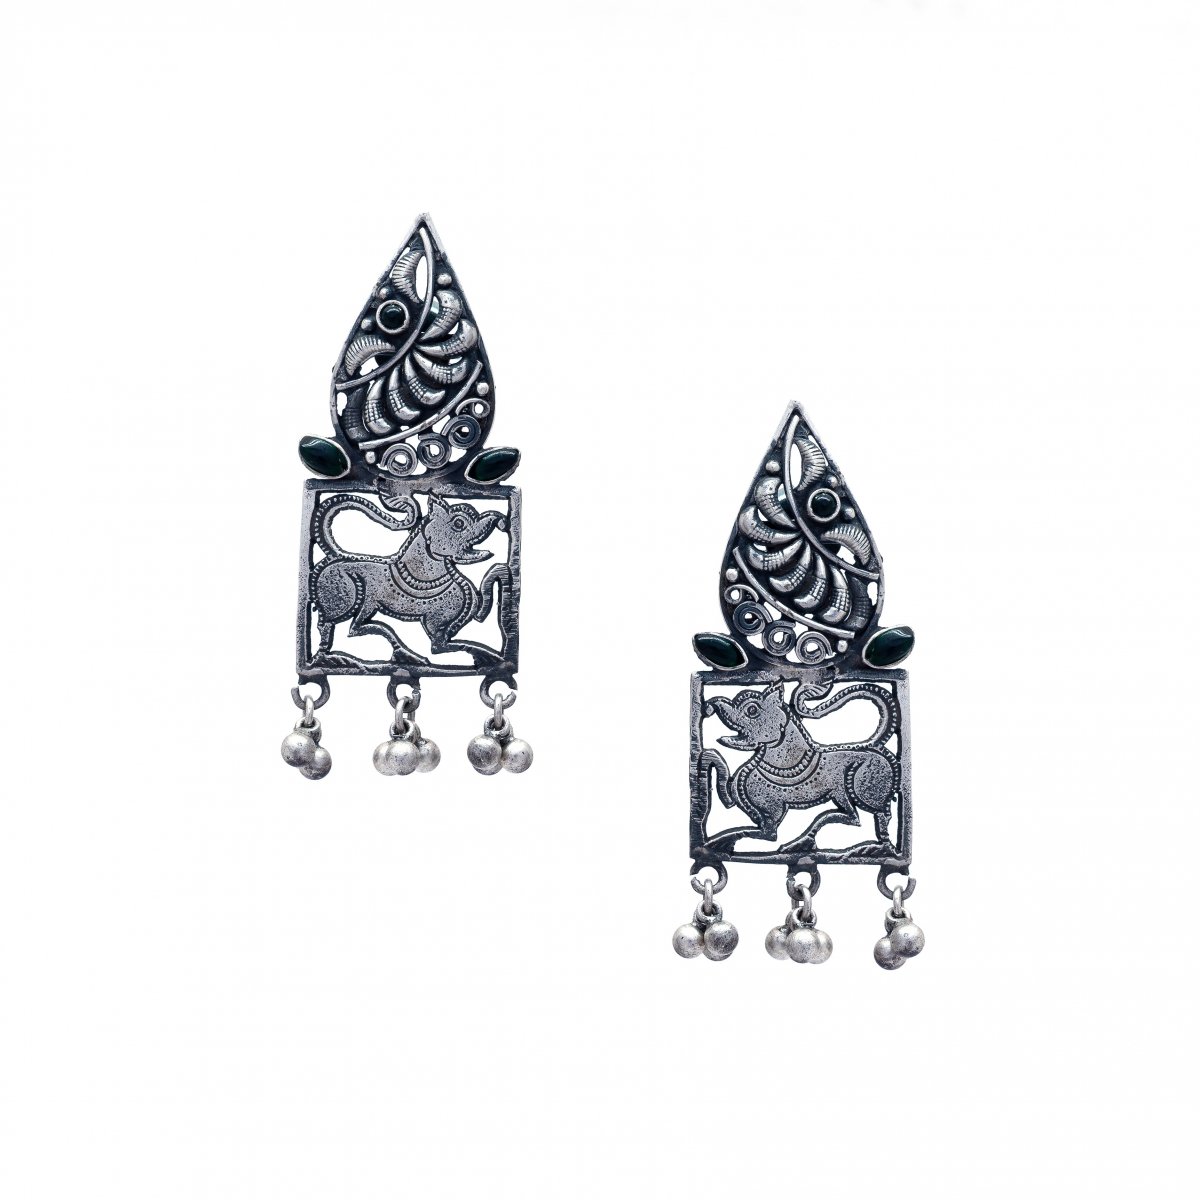 TRADITIONAL INDIAN ANTIQUE SILVER EARRINGS FOR WOMEN AND GIRLS 